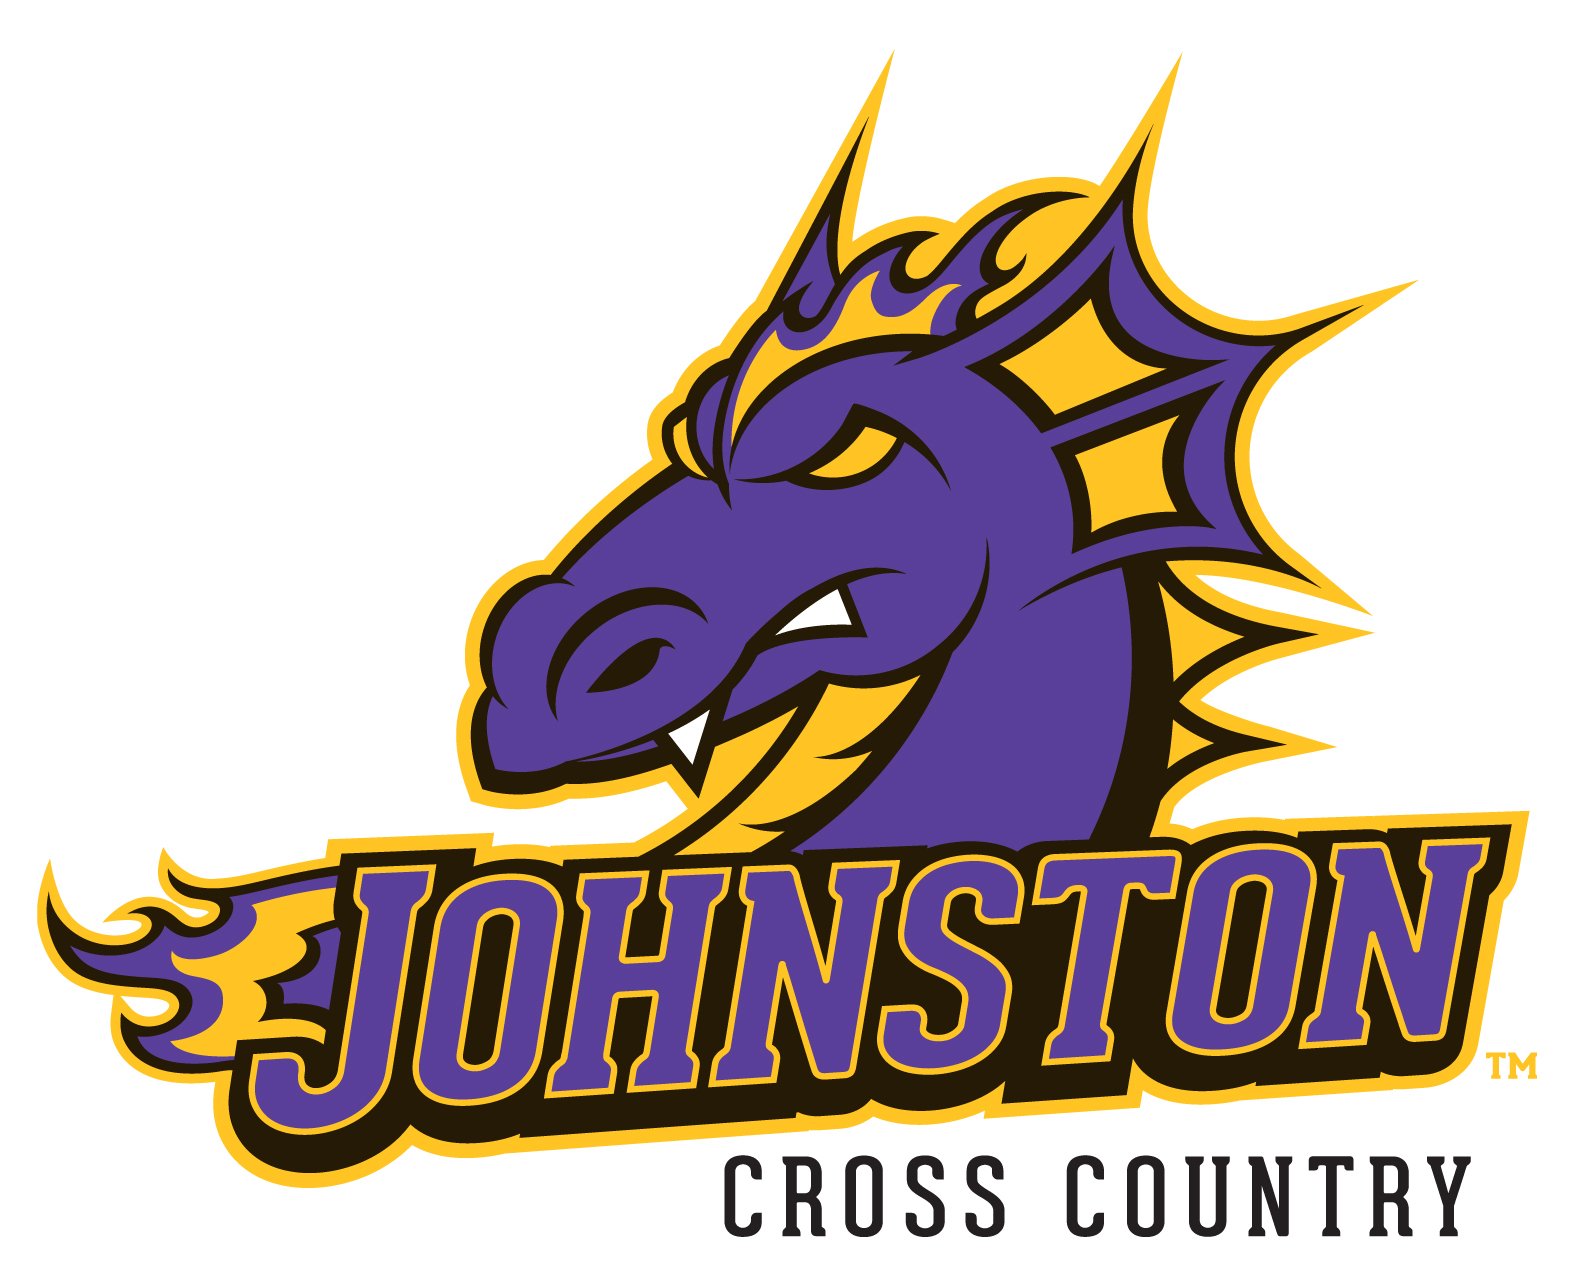 Official #twitter account of the Johnston Dragons Cross Country team. Coached by Matt Jaschen and Pat Mattingly.